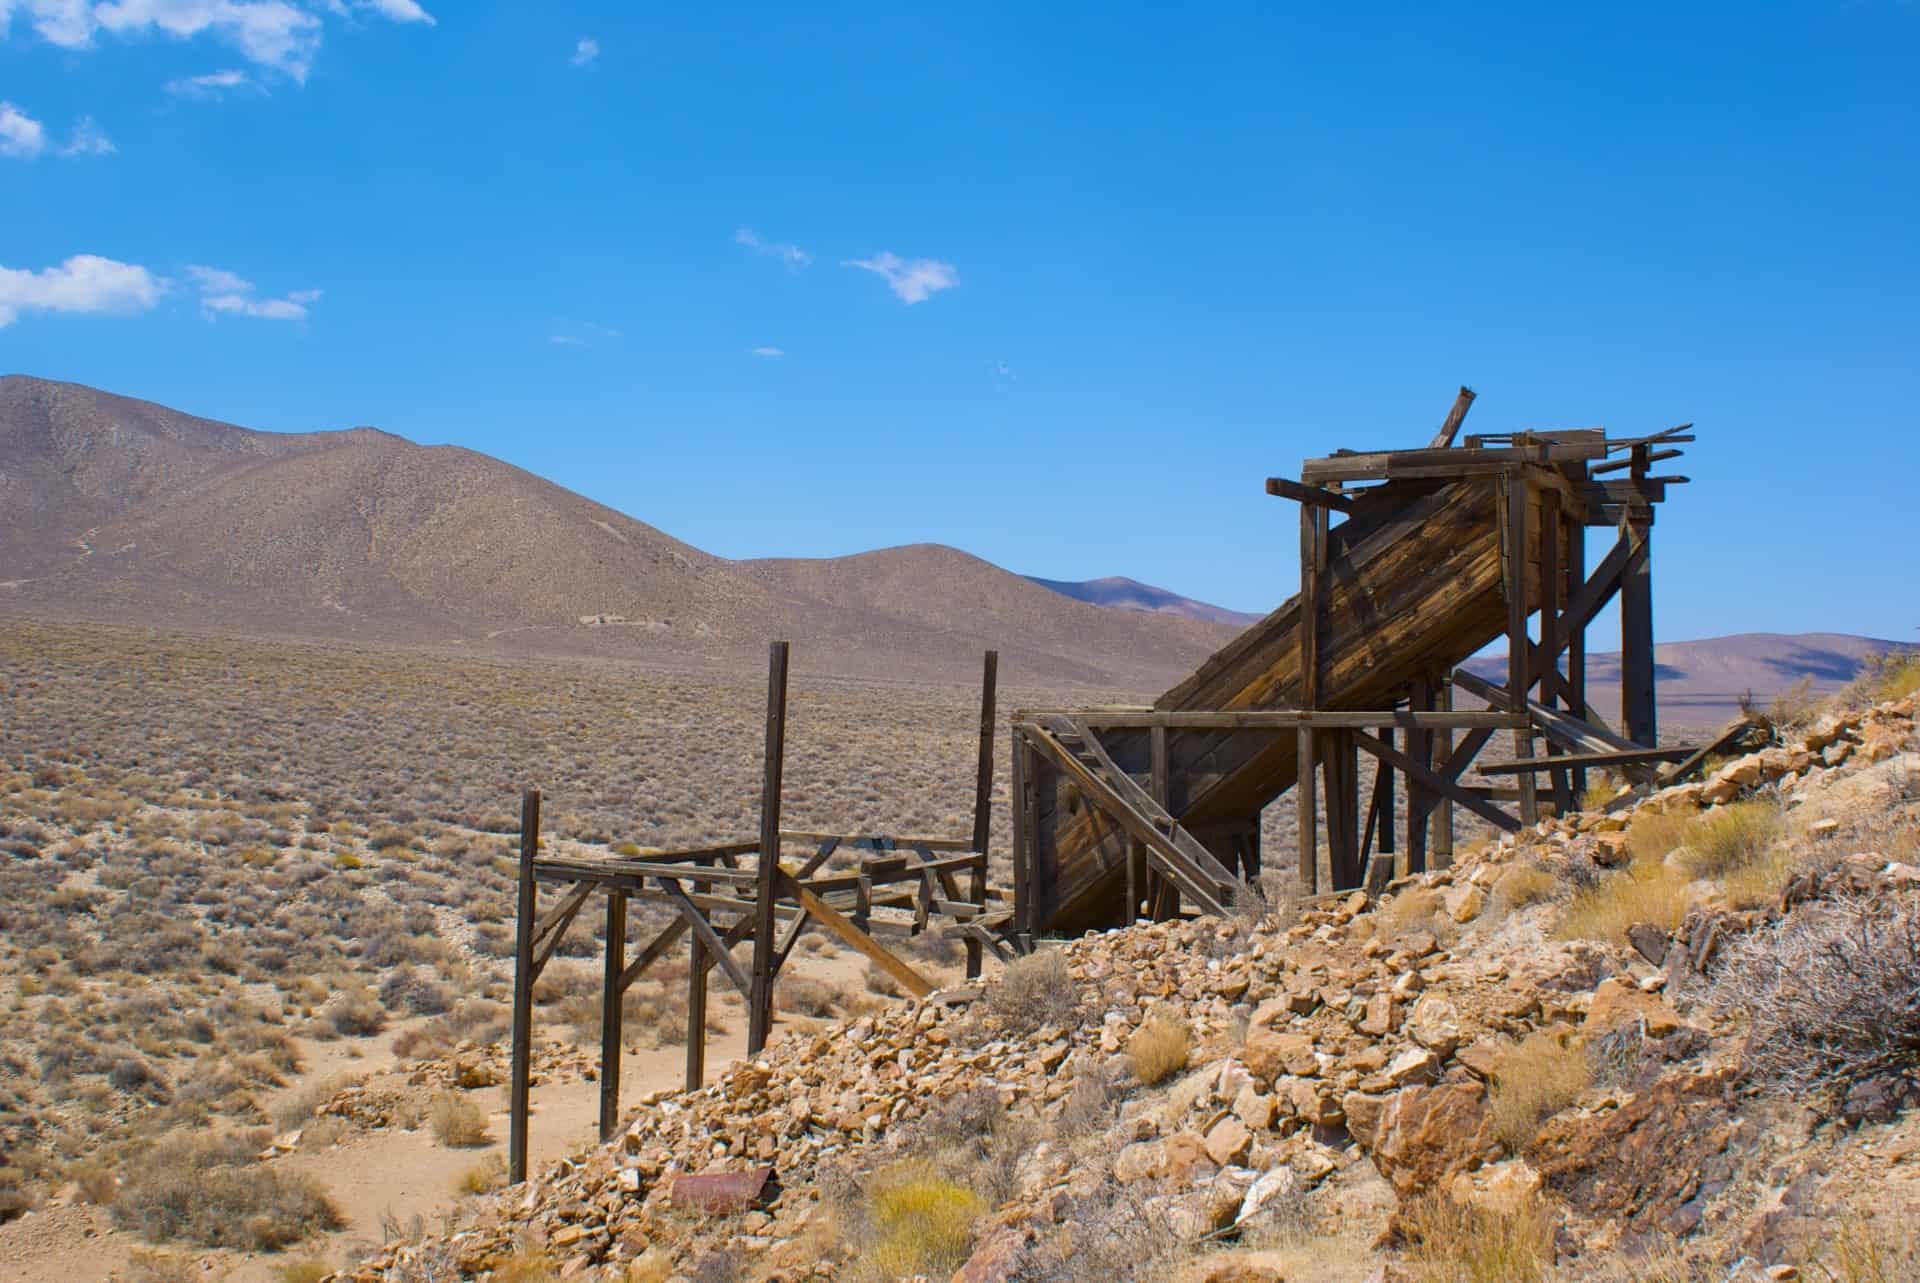 Fun facts about Nevada: Gold mining is prevalent across Nevada.